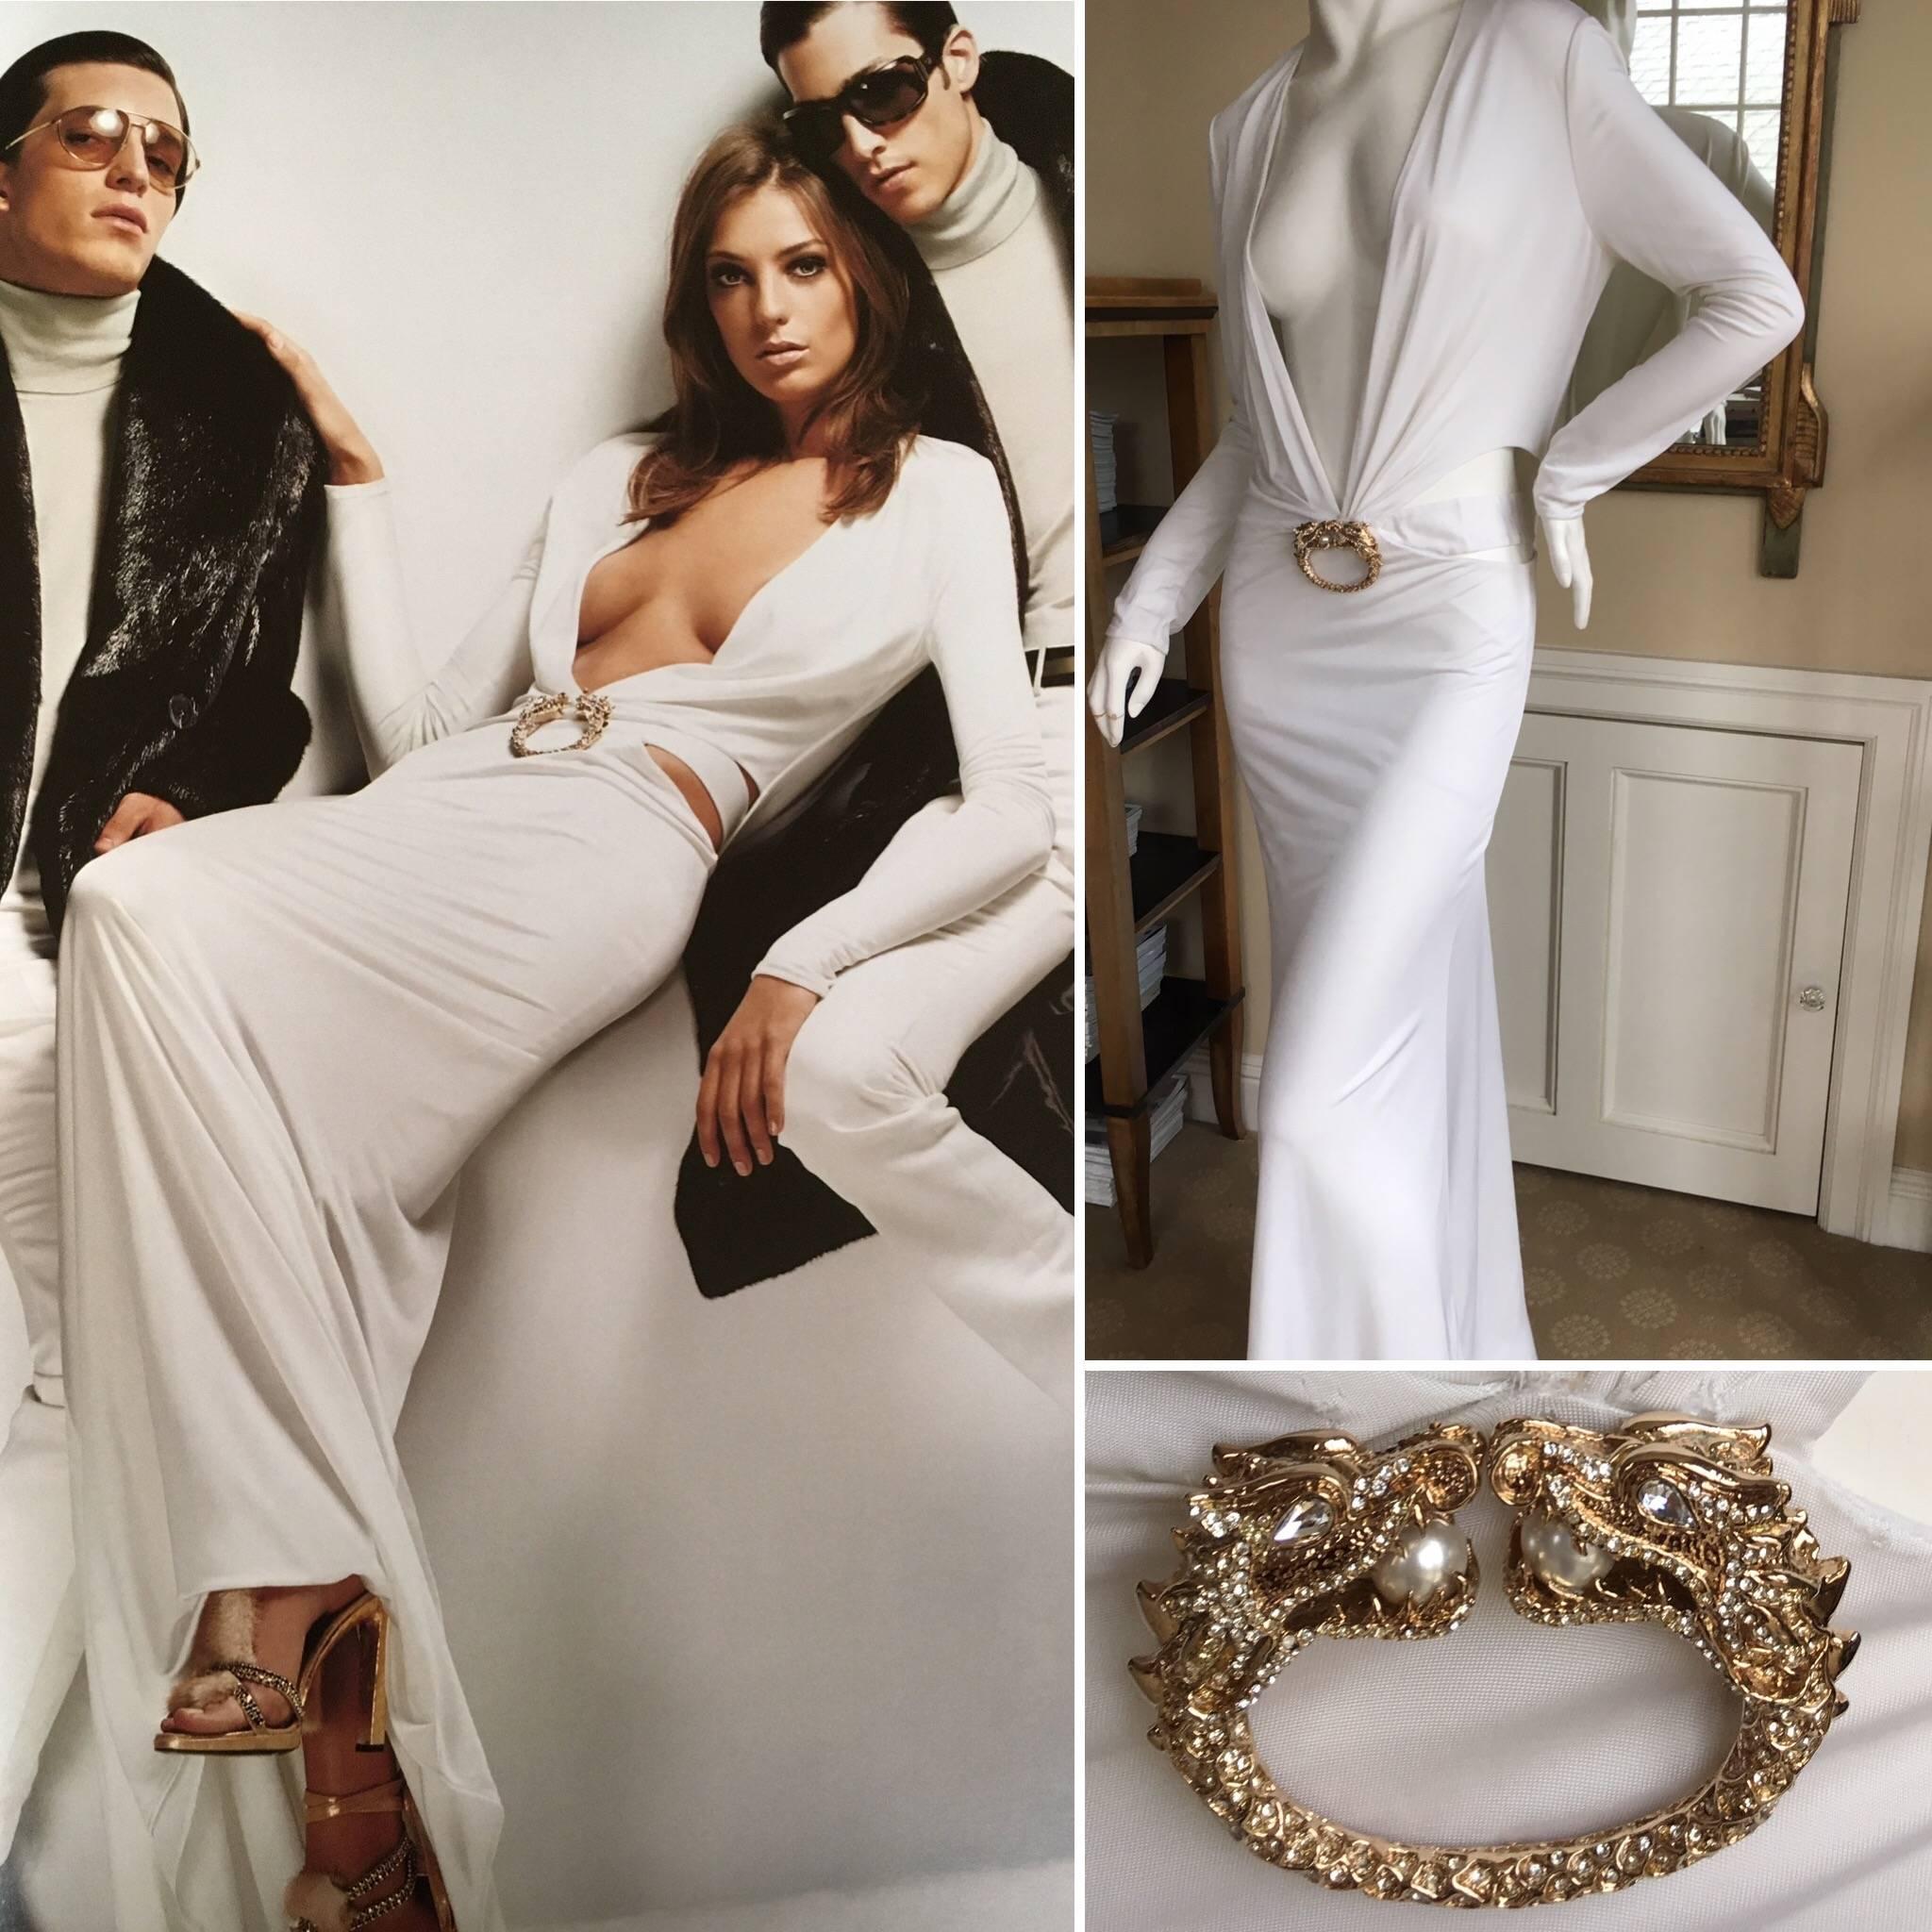 Iconic low cut white evening dress with jeweled dragon from Gucci by Tom Ford 2004.
As featured on Daria in the Gucci Ad.
Super low cut bust, with a keyhole back.
Includes inner "belt", but it has been separated from the dress.
For the